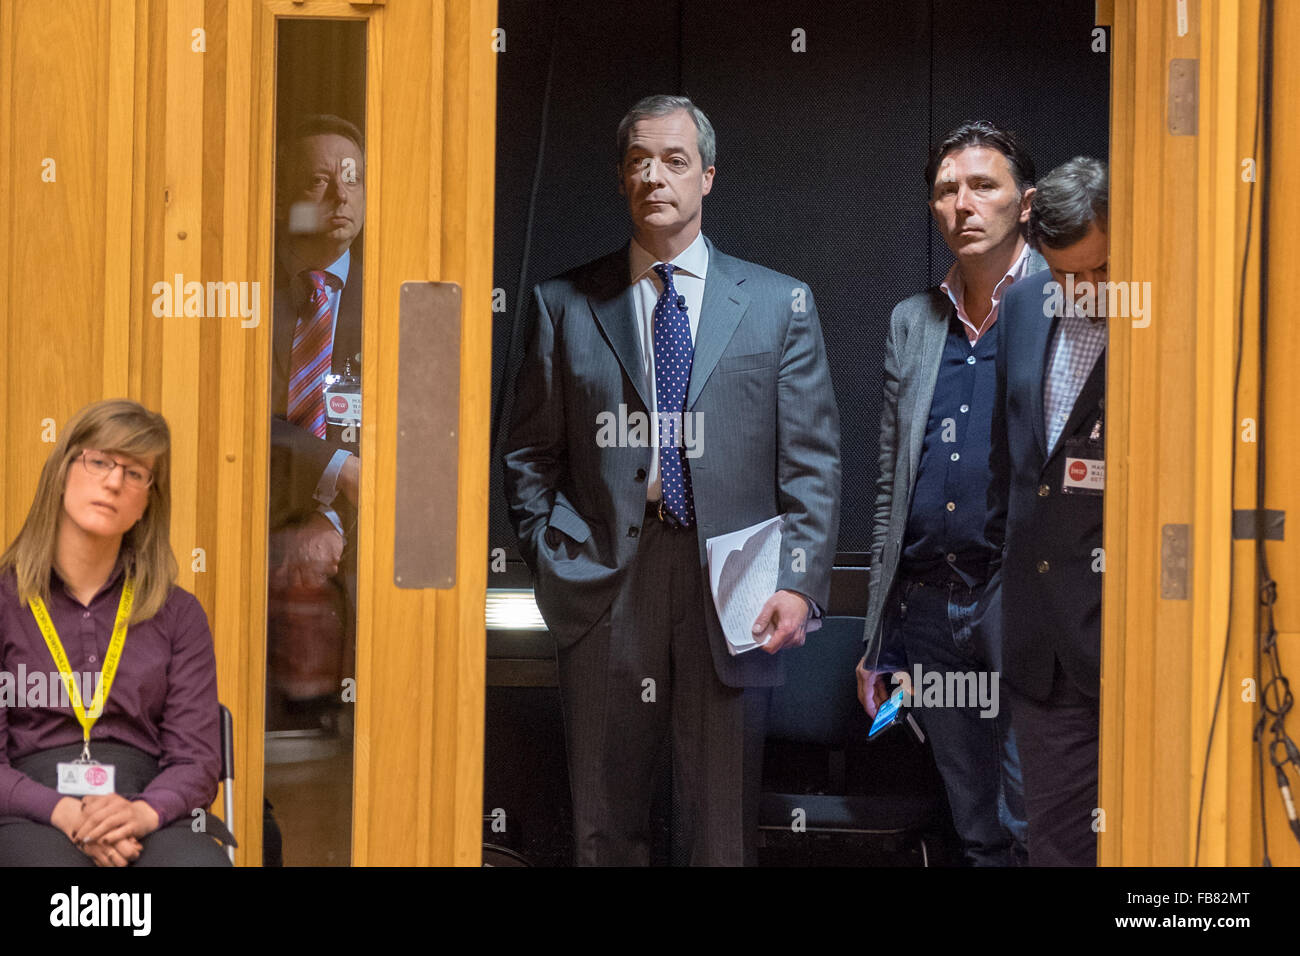 Wales Millennium Centre, Cardiff bay, Cardiff, Wales, January 11, 2016: IWA (Institute of Welsh Affairs), in partnership with Cardiff University, organises a debate between First Minister Carwyn Jones and Nigel Farage, on European referendum and UK's future in the European Union. Credit:  Daniel Damaschin/Alamy Live News Stock Photo